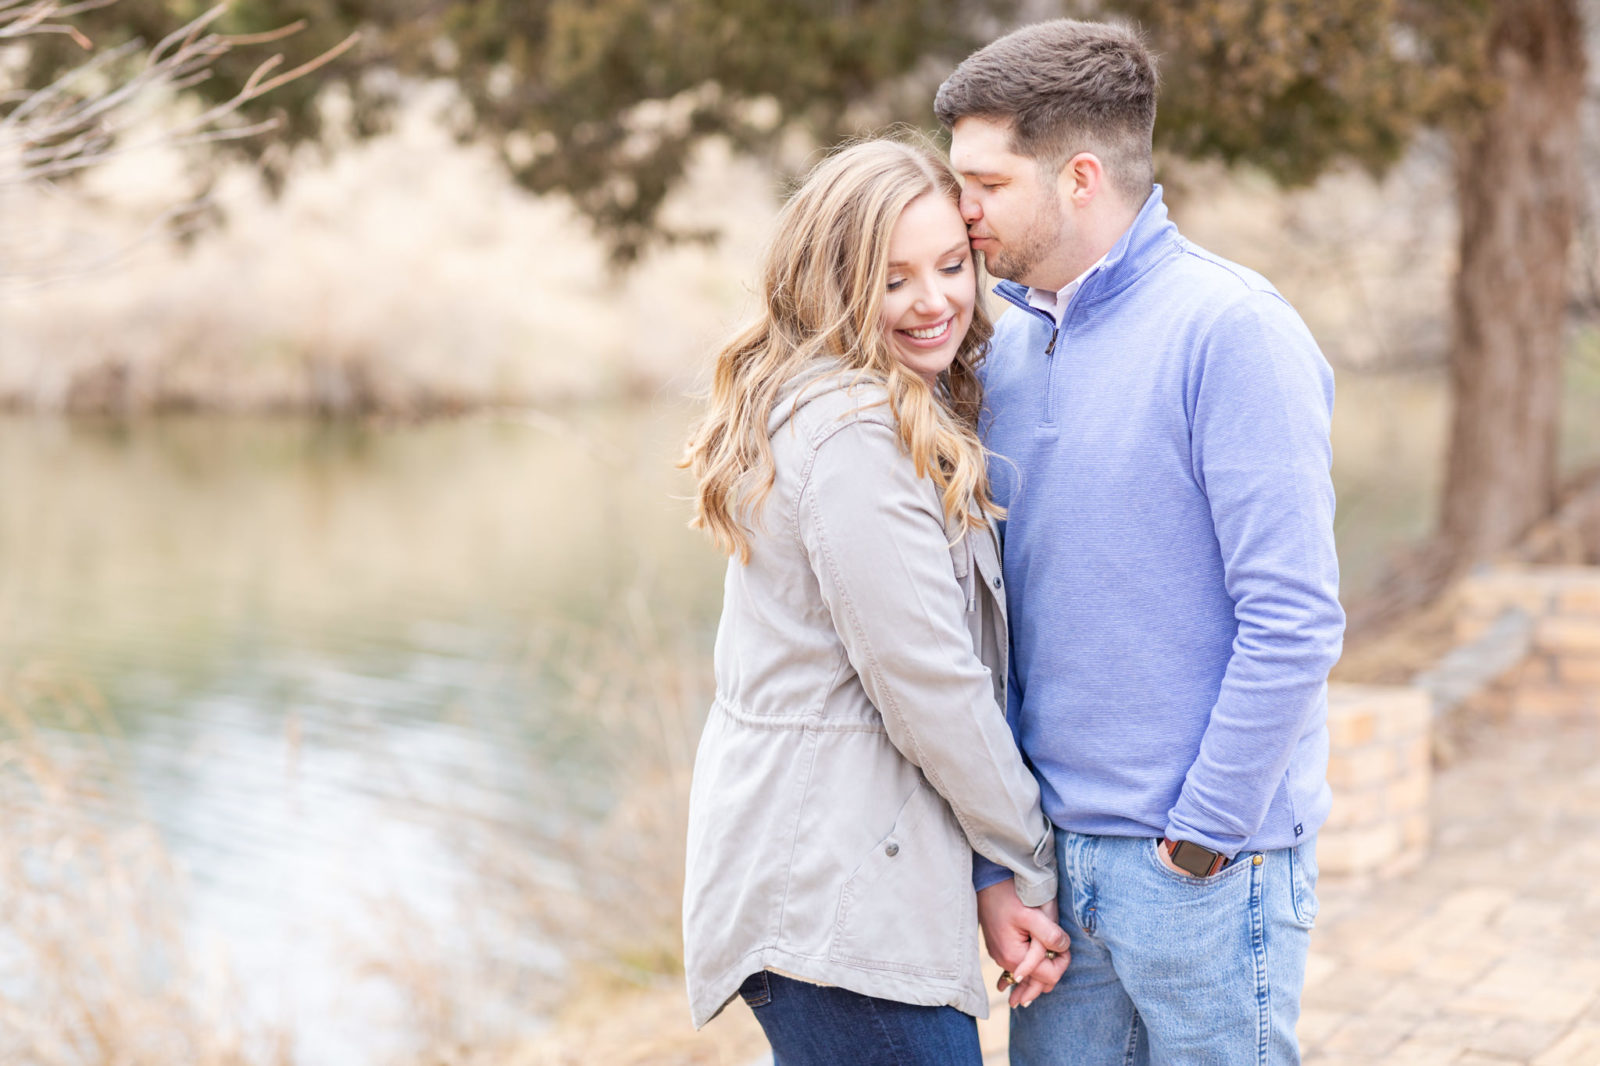 Engagement Session at Texas Tech | Shelby & Conner - Dawn Elizabeth Studios